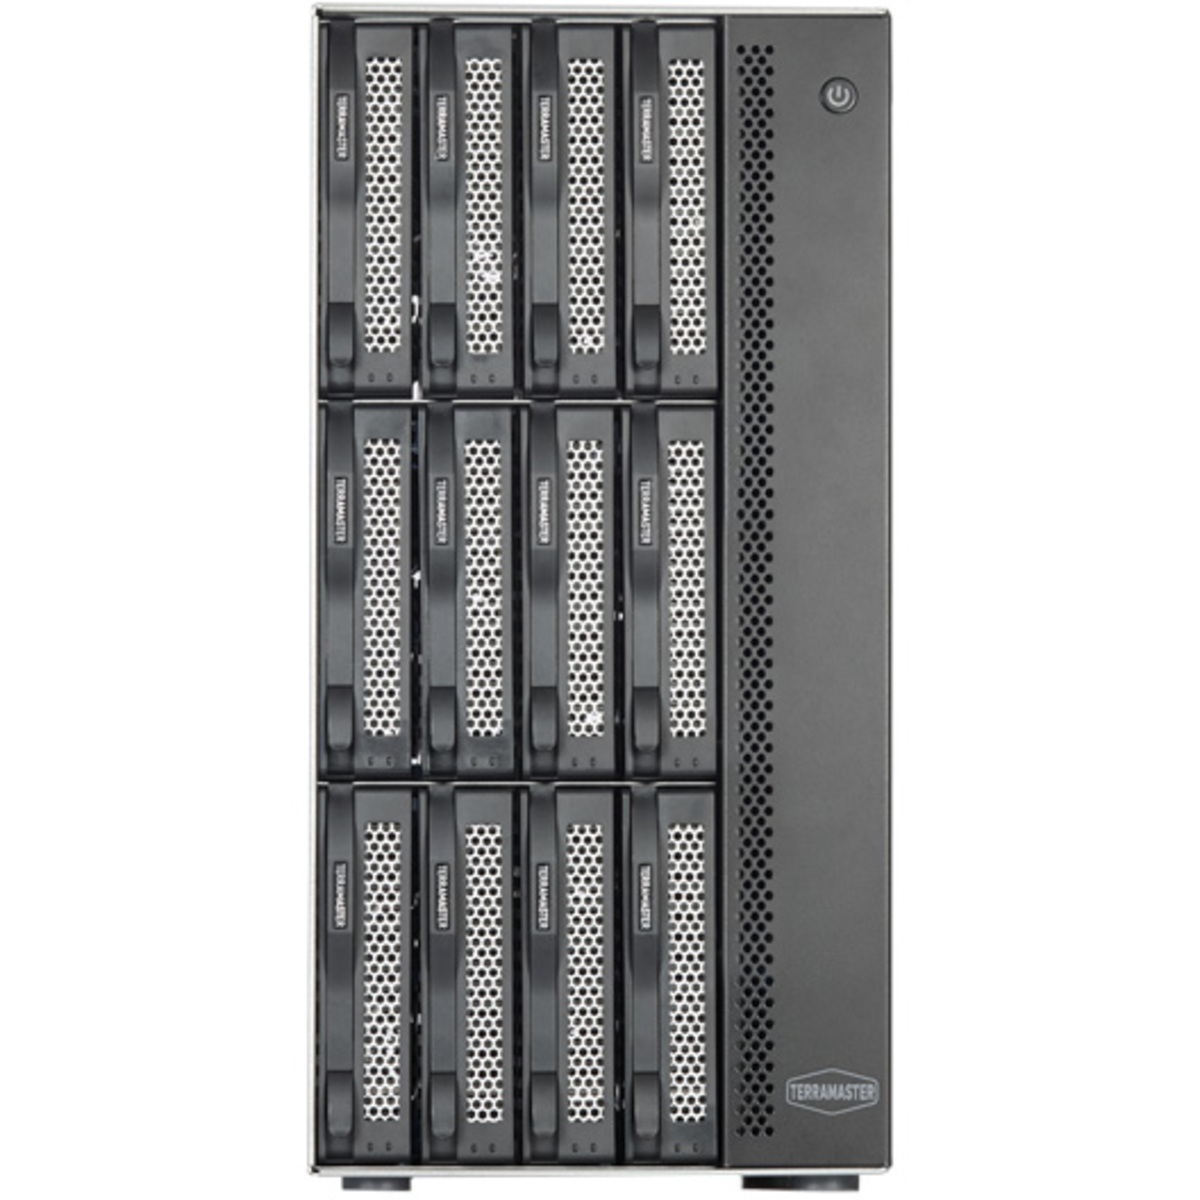 TerraMaster T12-450 144tb 12-Bay Desktop Multimedia / Power User / Business NAS - Network Attached Storage Device 9x16tb Western Digital Ultrastar DC HC550 WUH721816ALE6L4 3.5 7200rpm SATA 6Gb/s HDD ENTERPRISE Class Drives Installed - Burn-In Tested T12-450